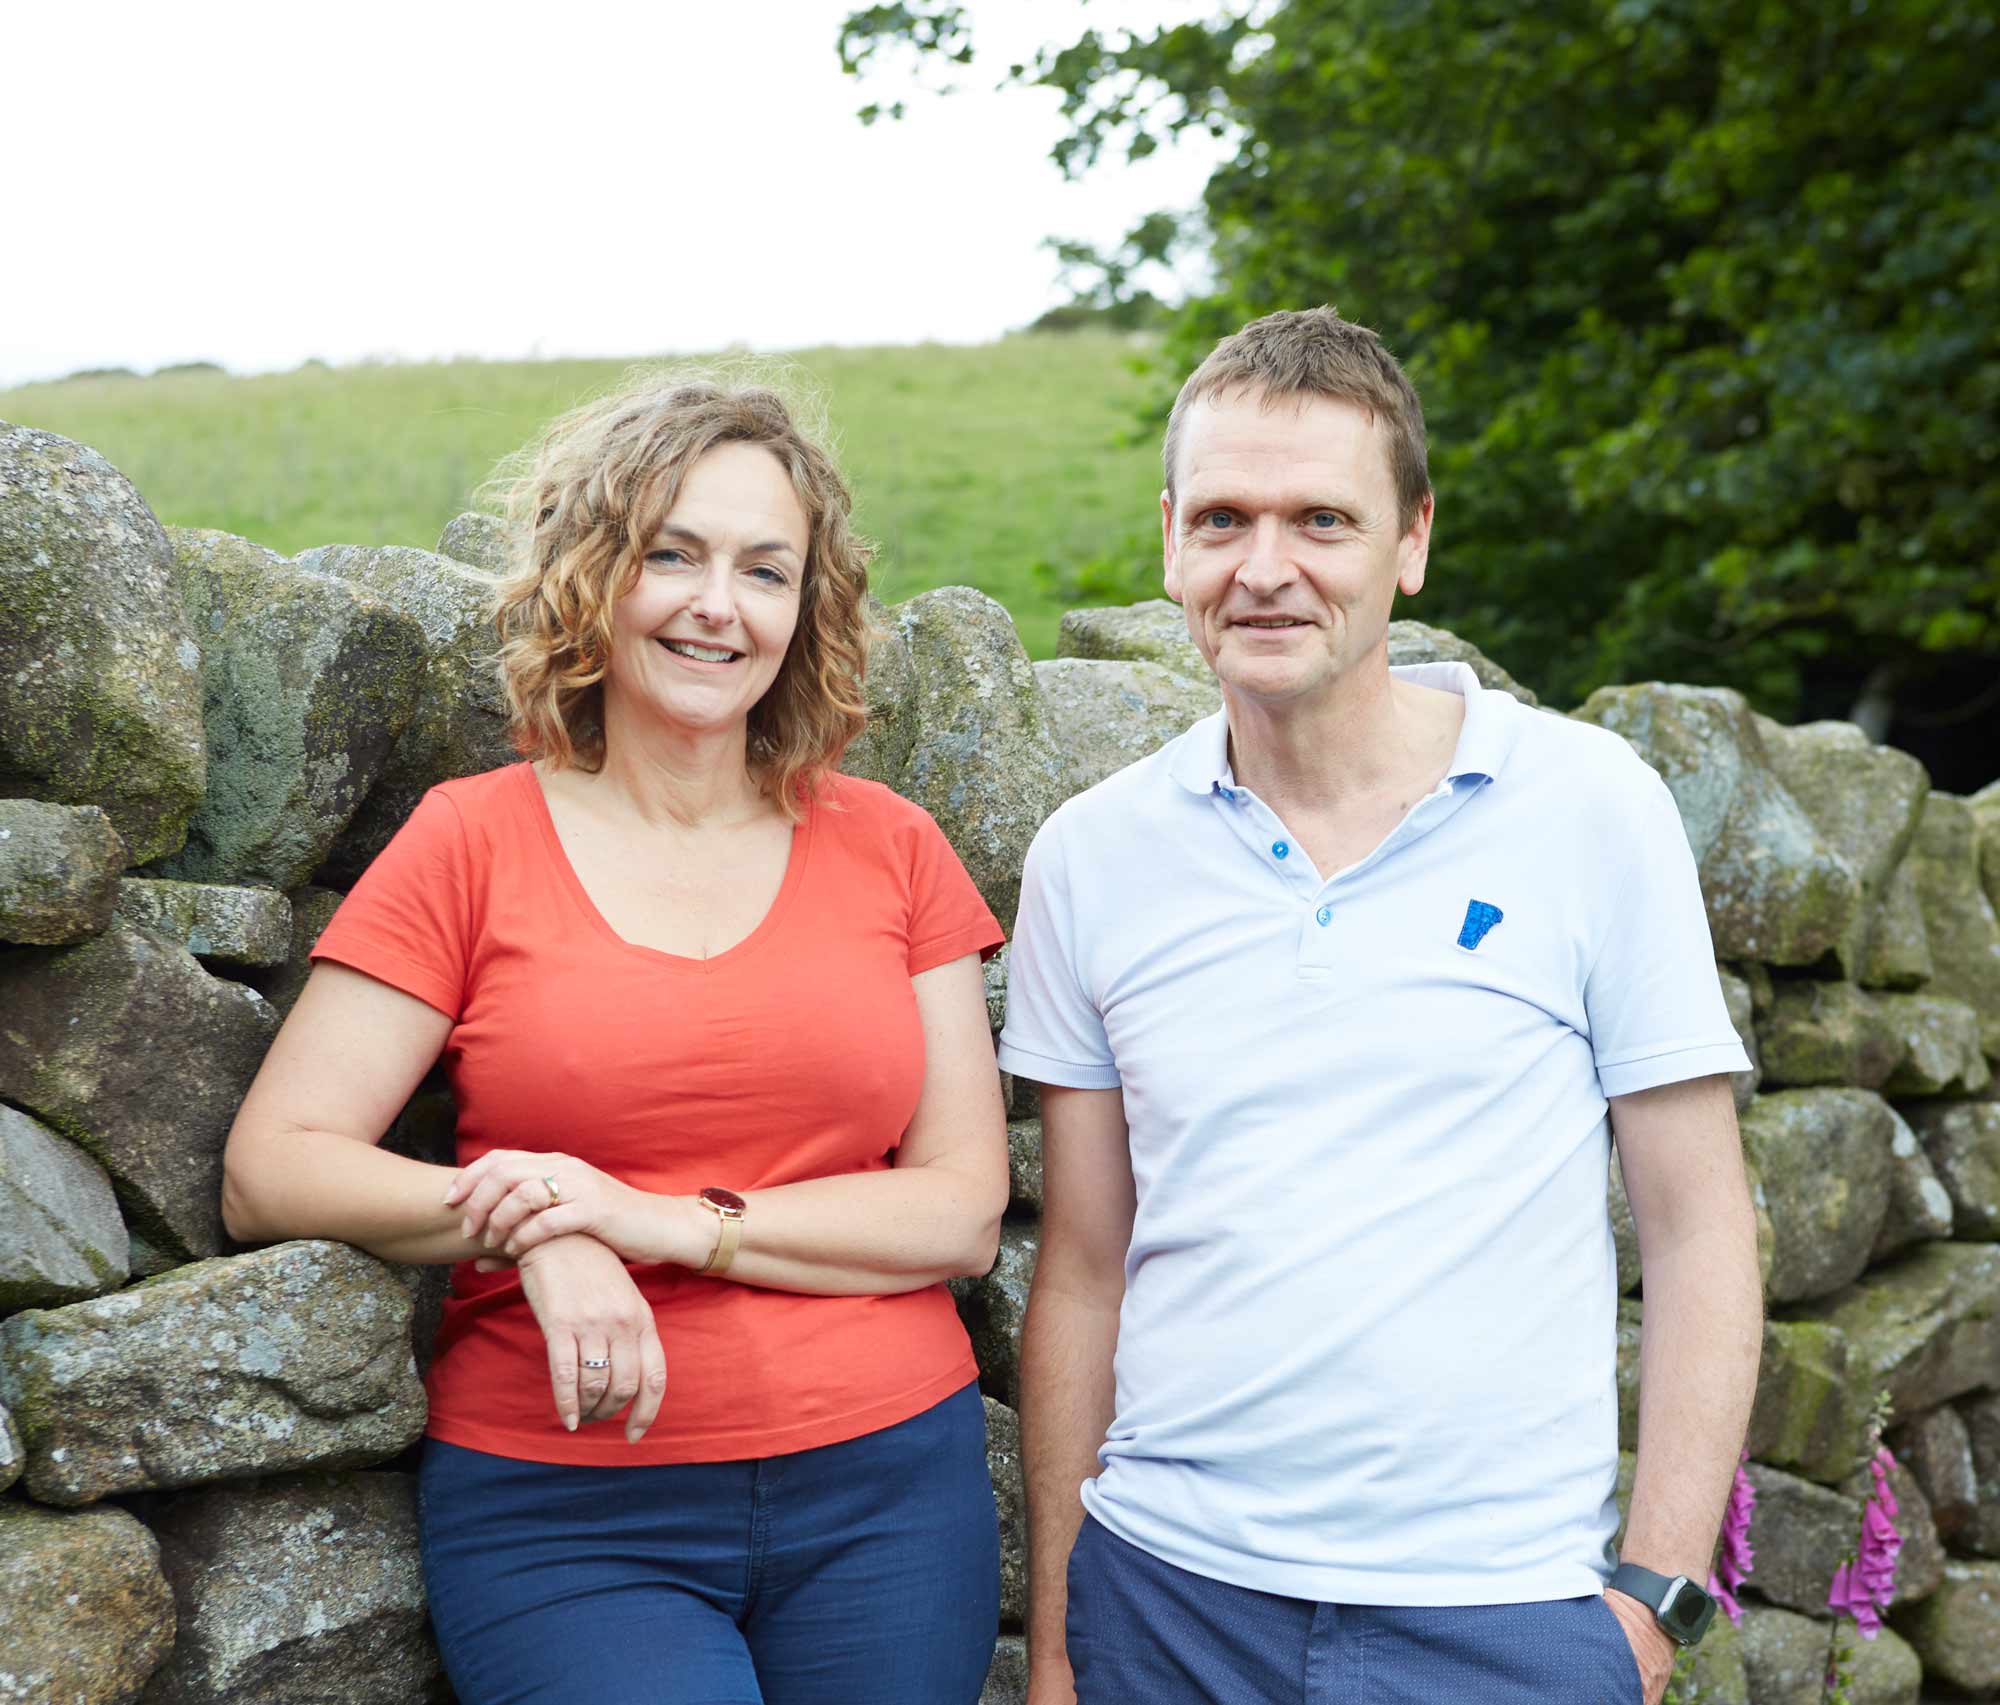 Make it Wild founders, Helen and Chris Neave